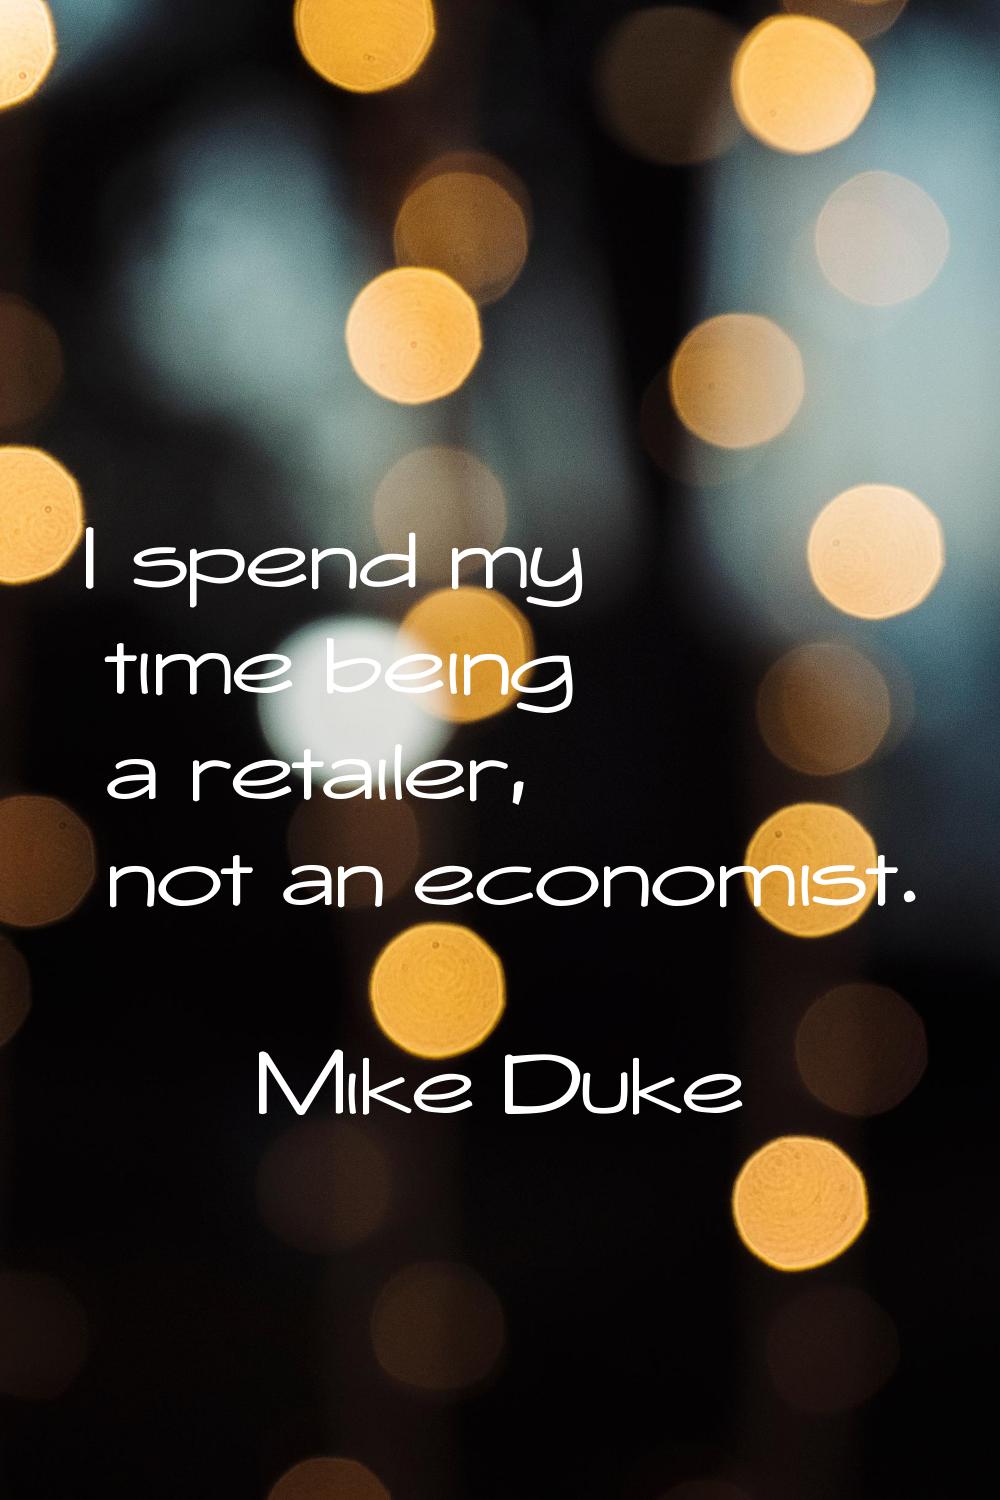 I spend my time being a retailer, not an economist.